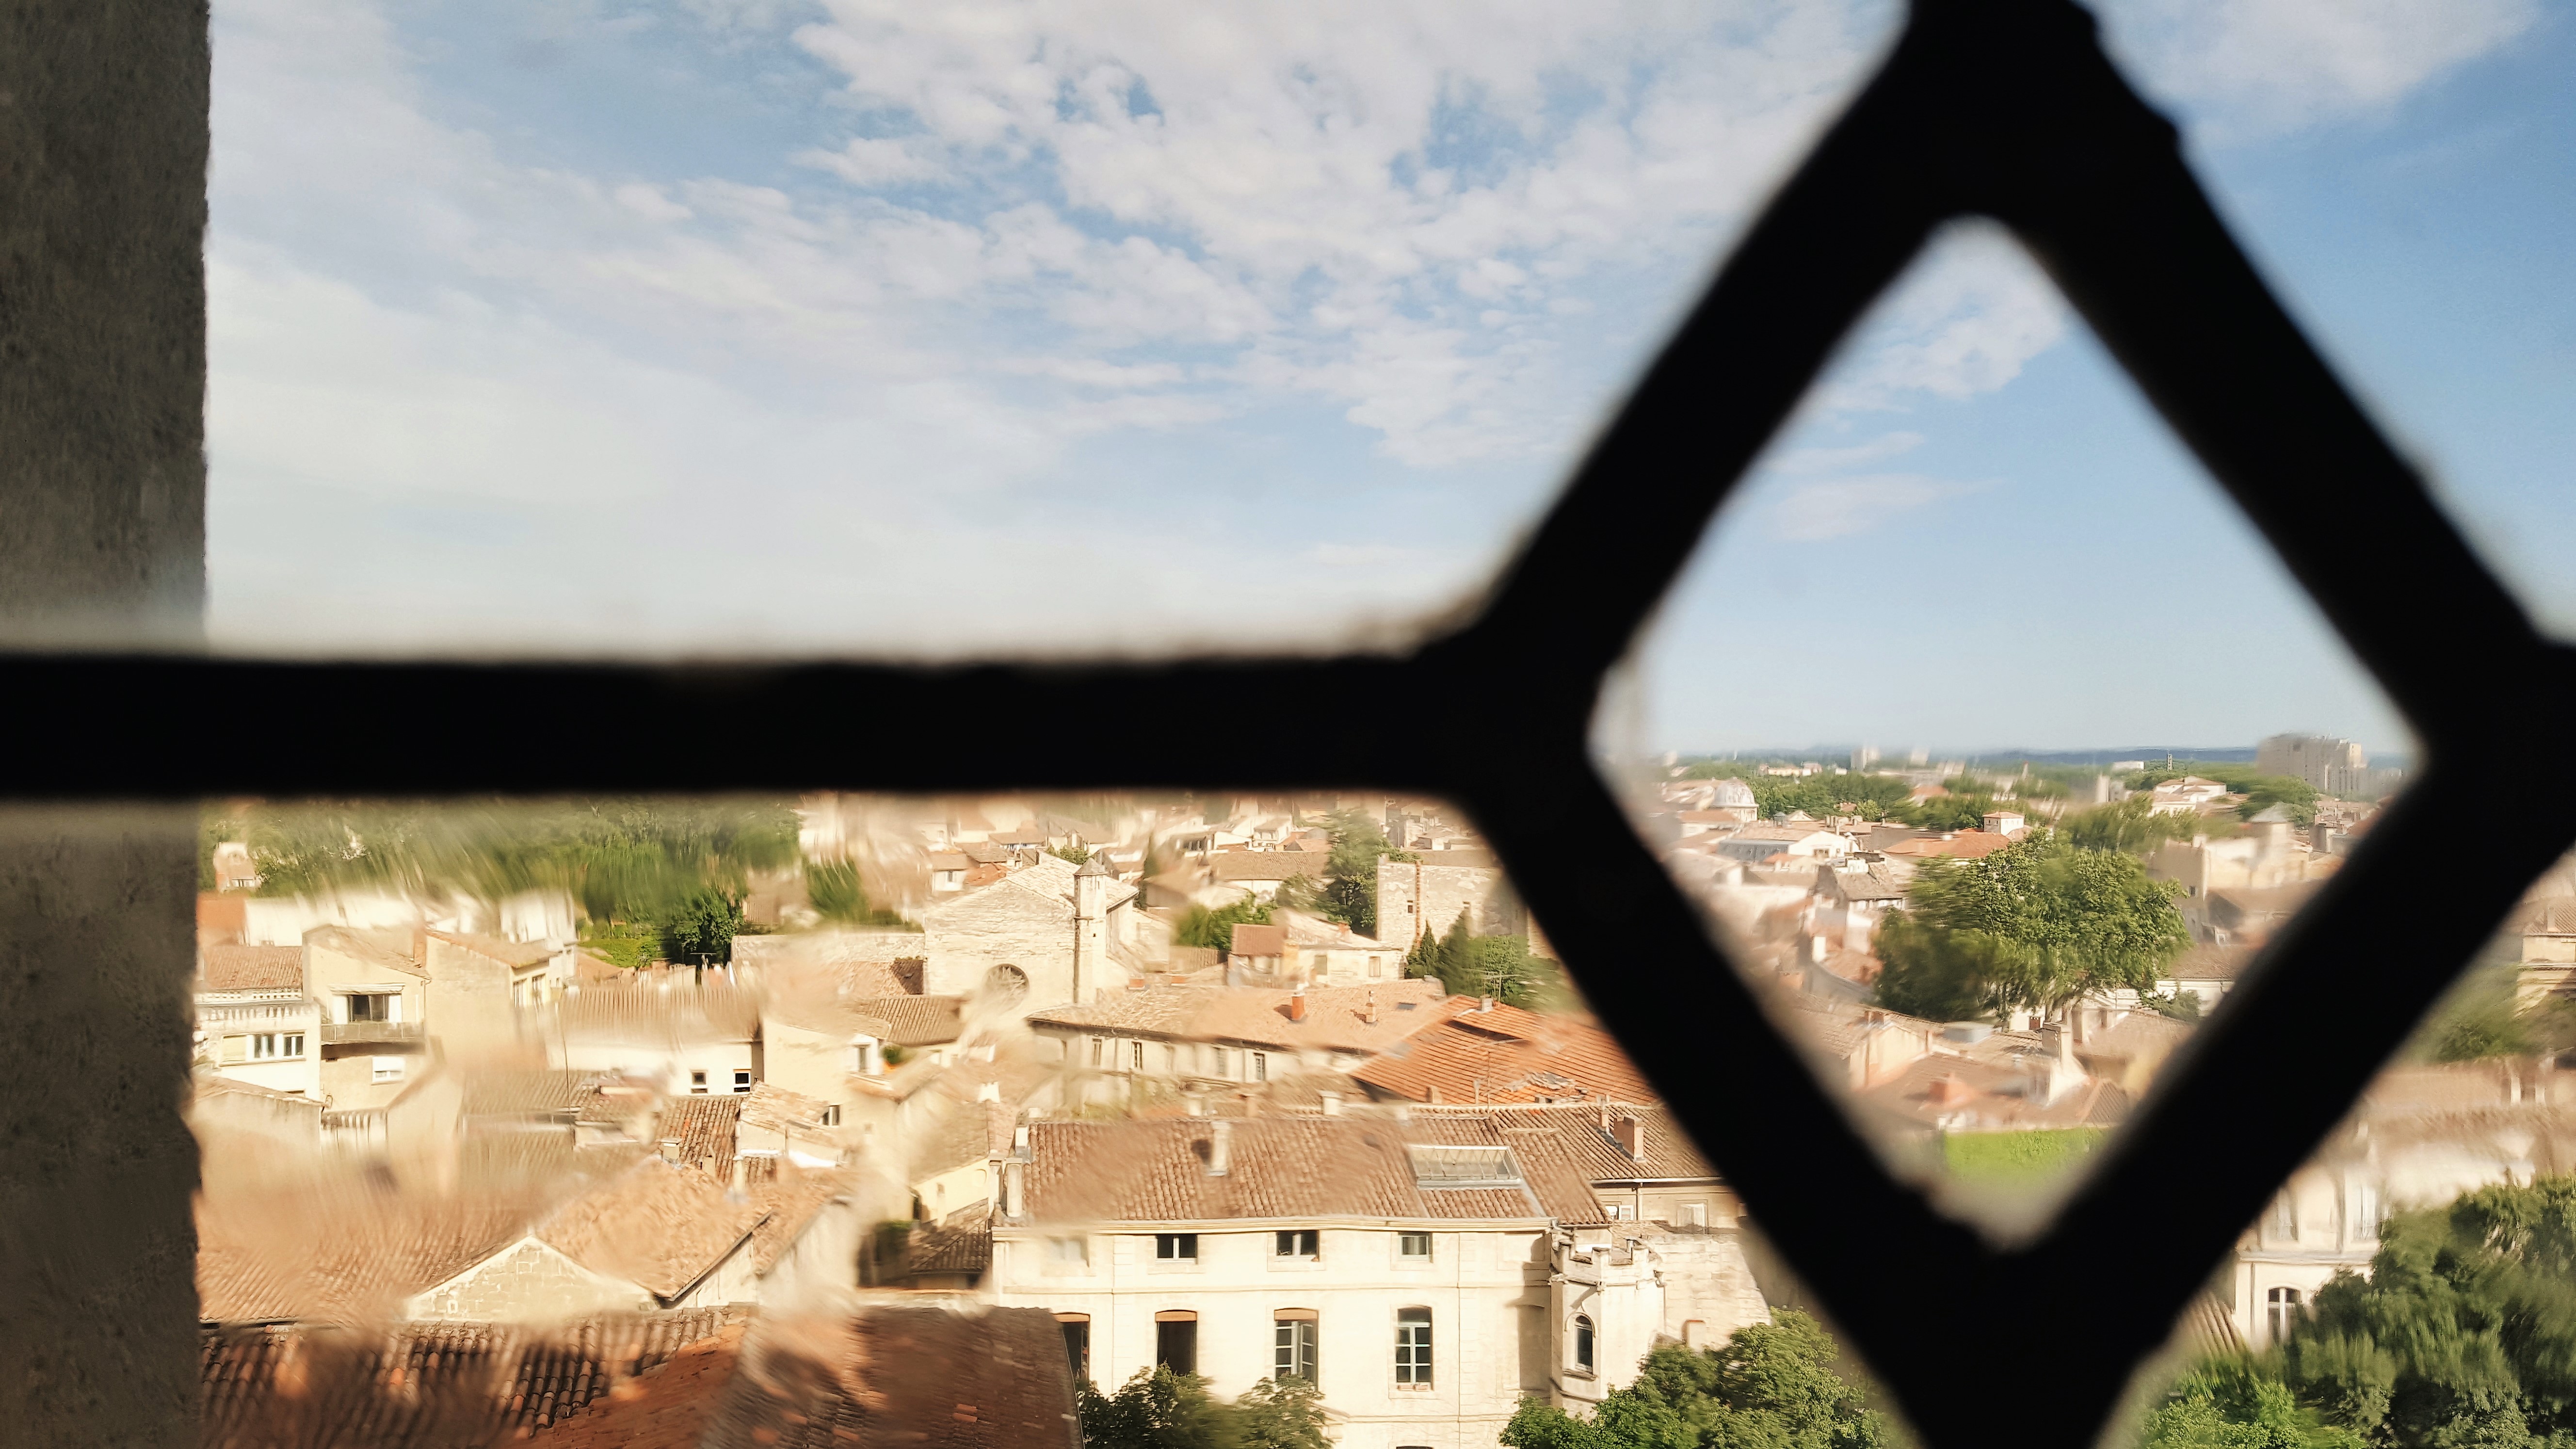 Looking through glass in Avignon, France